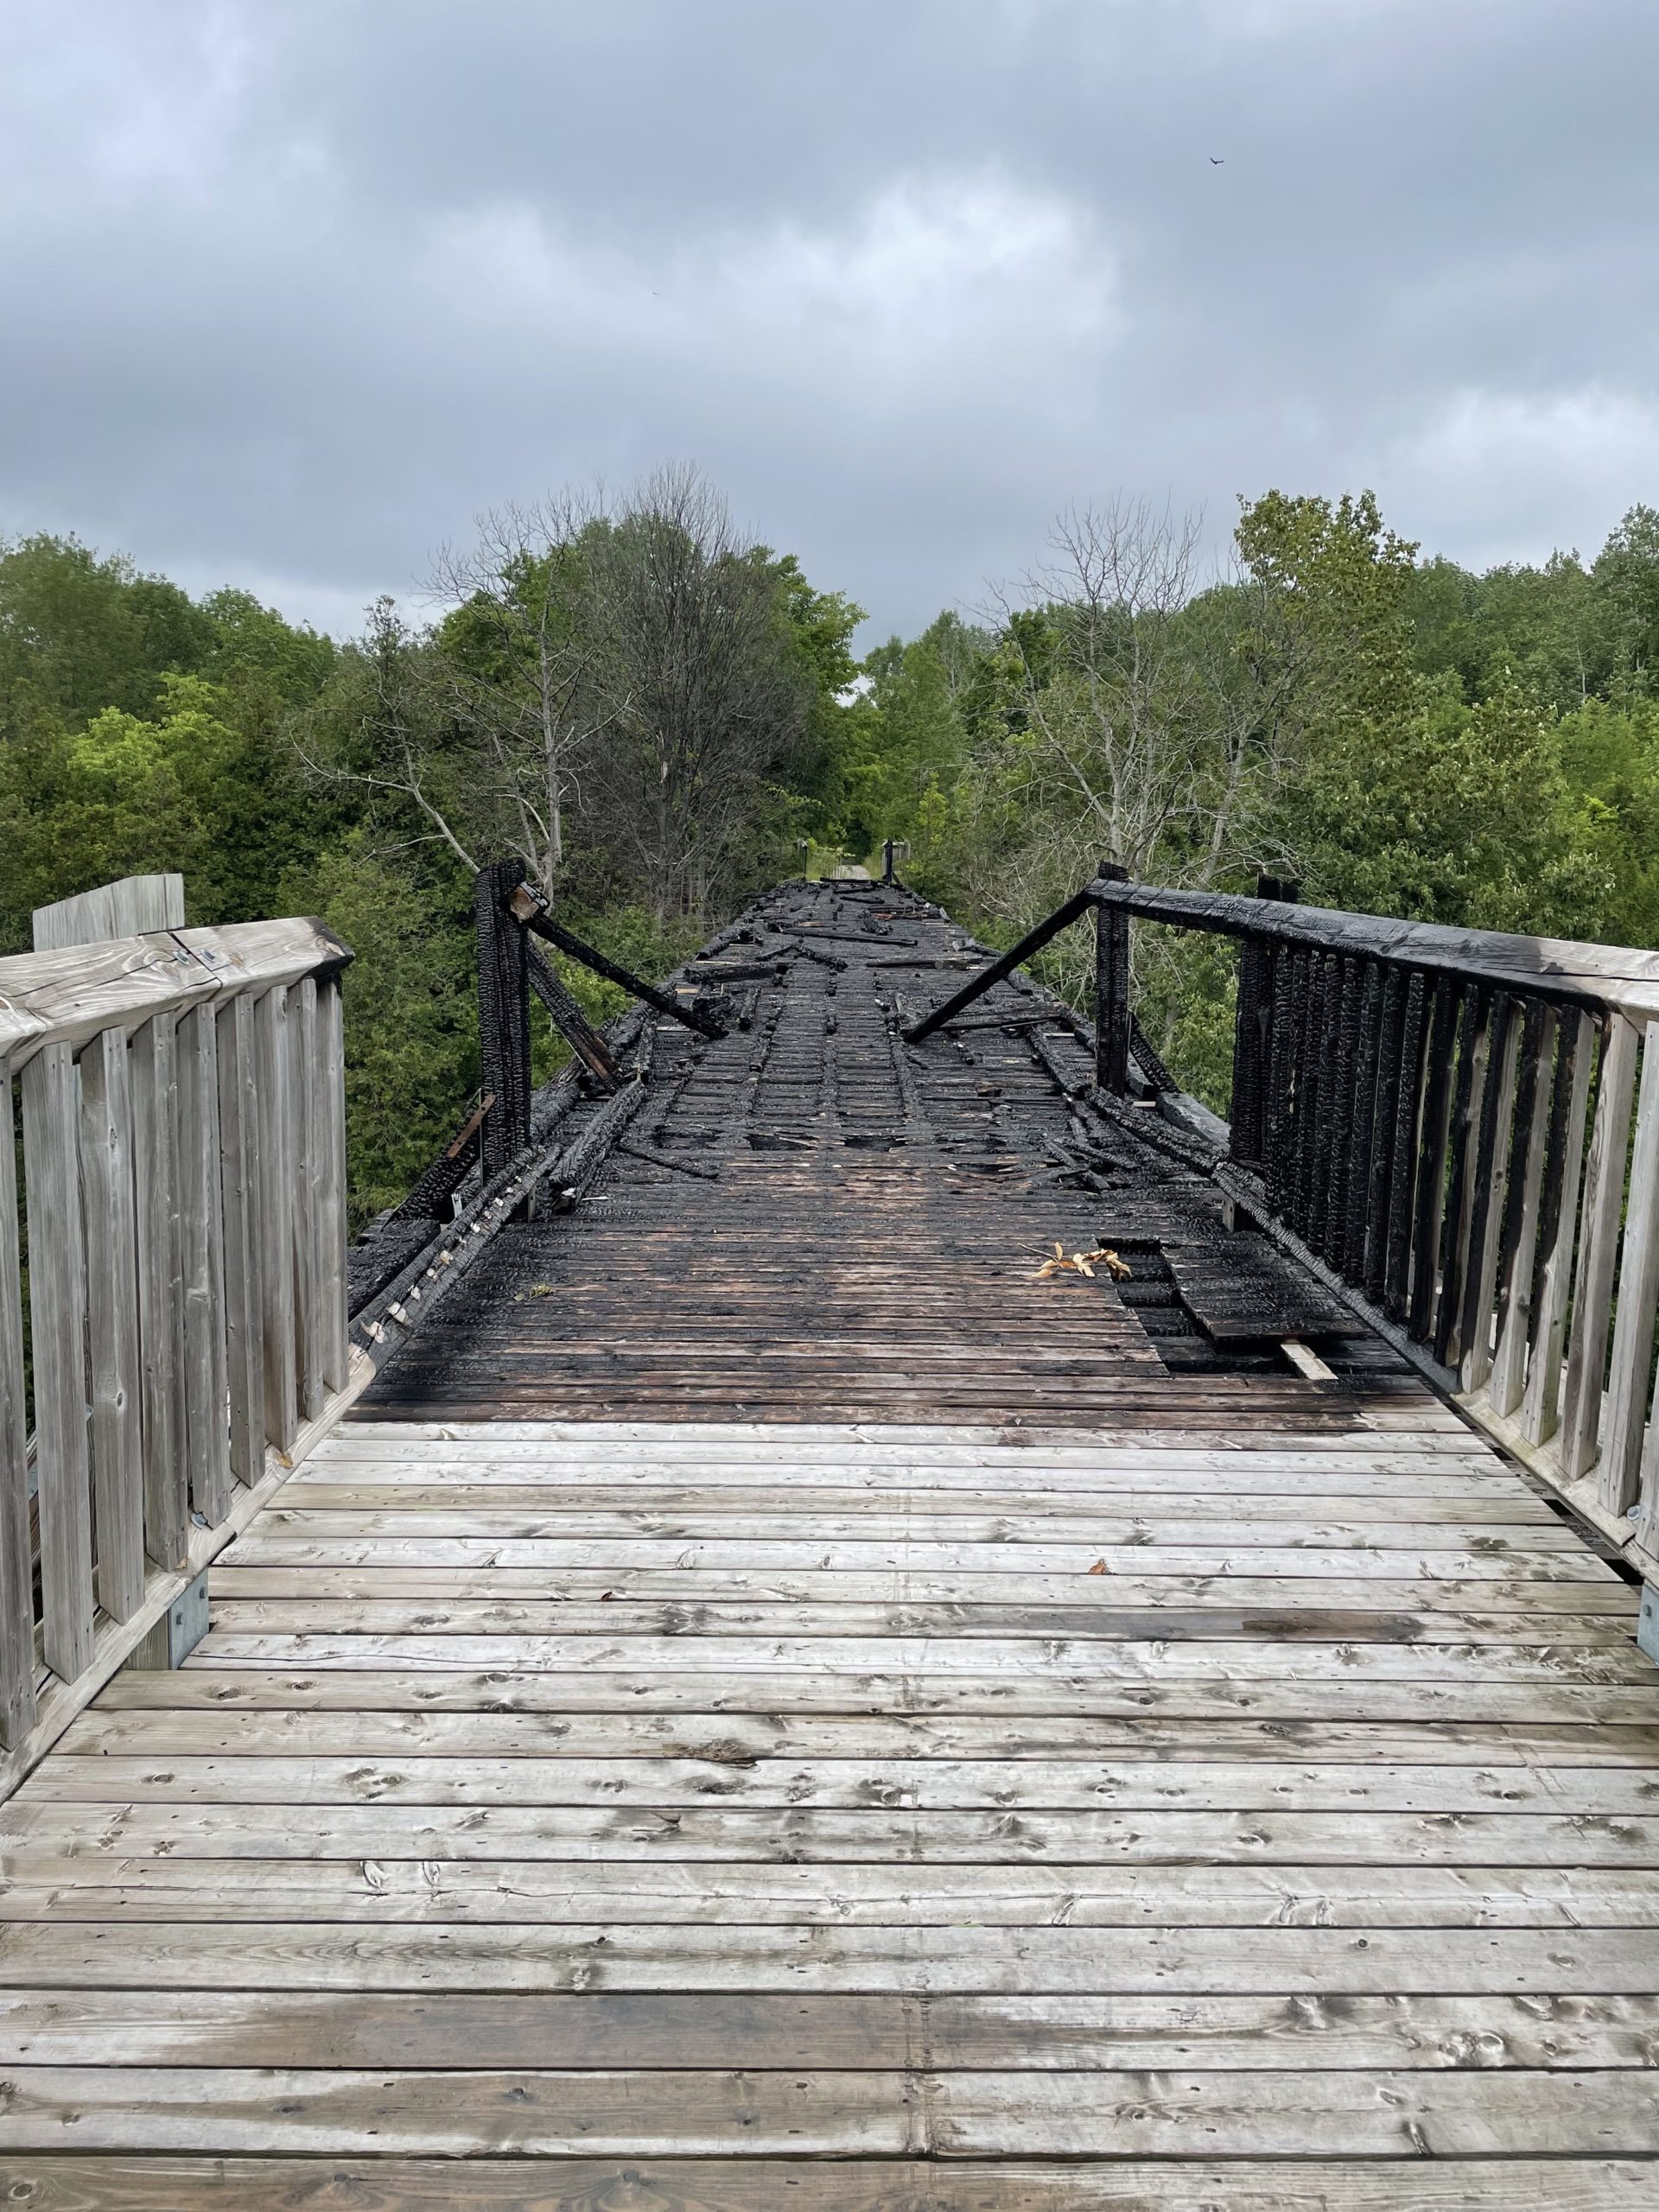 County to commence repairs on local bridge this summer